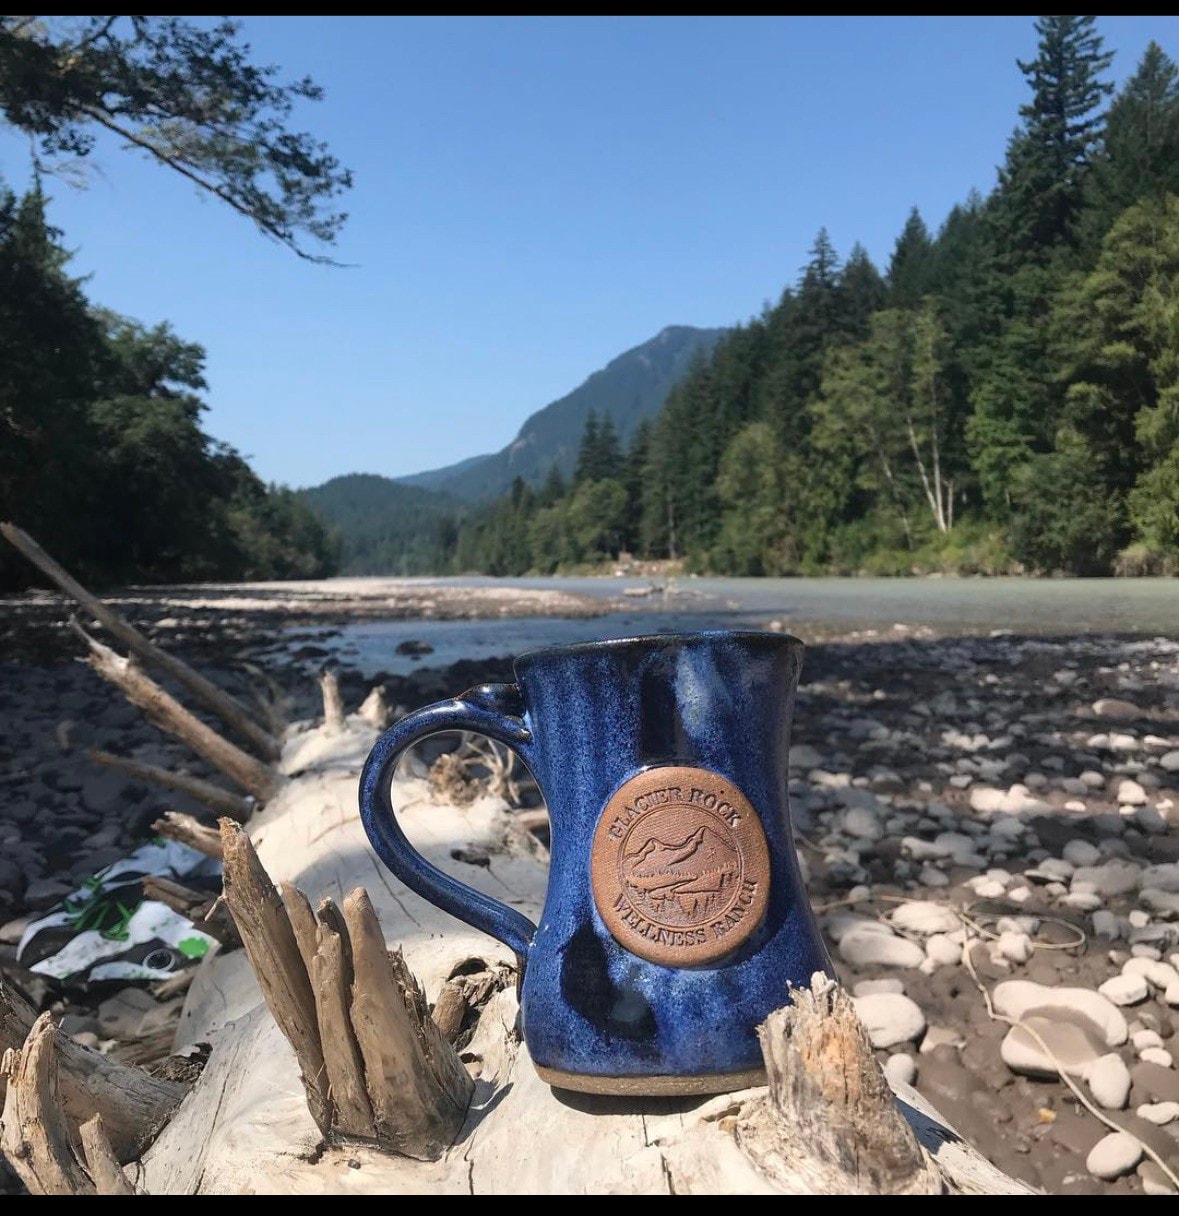 Camping by the Cowlitz River